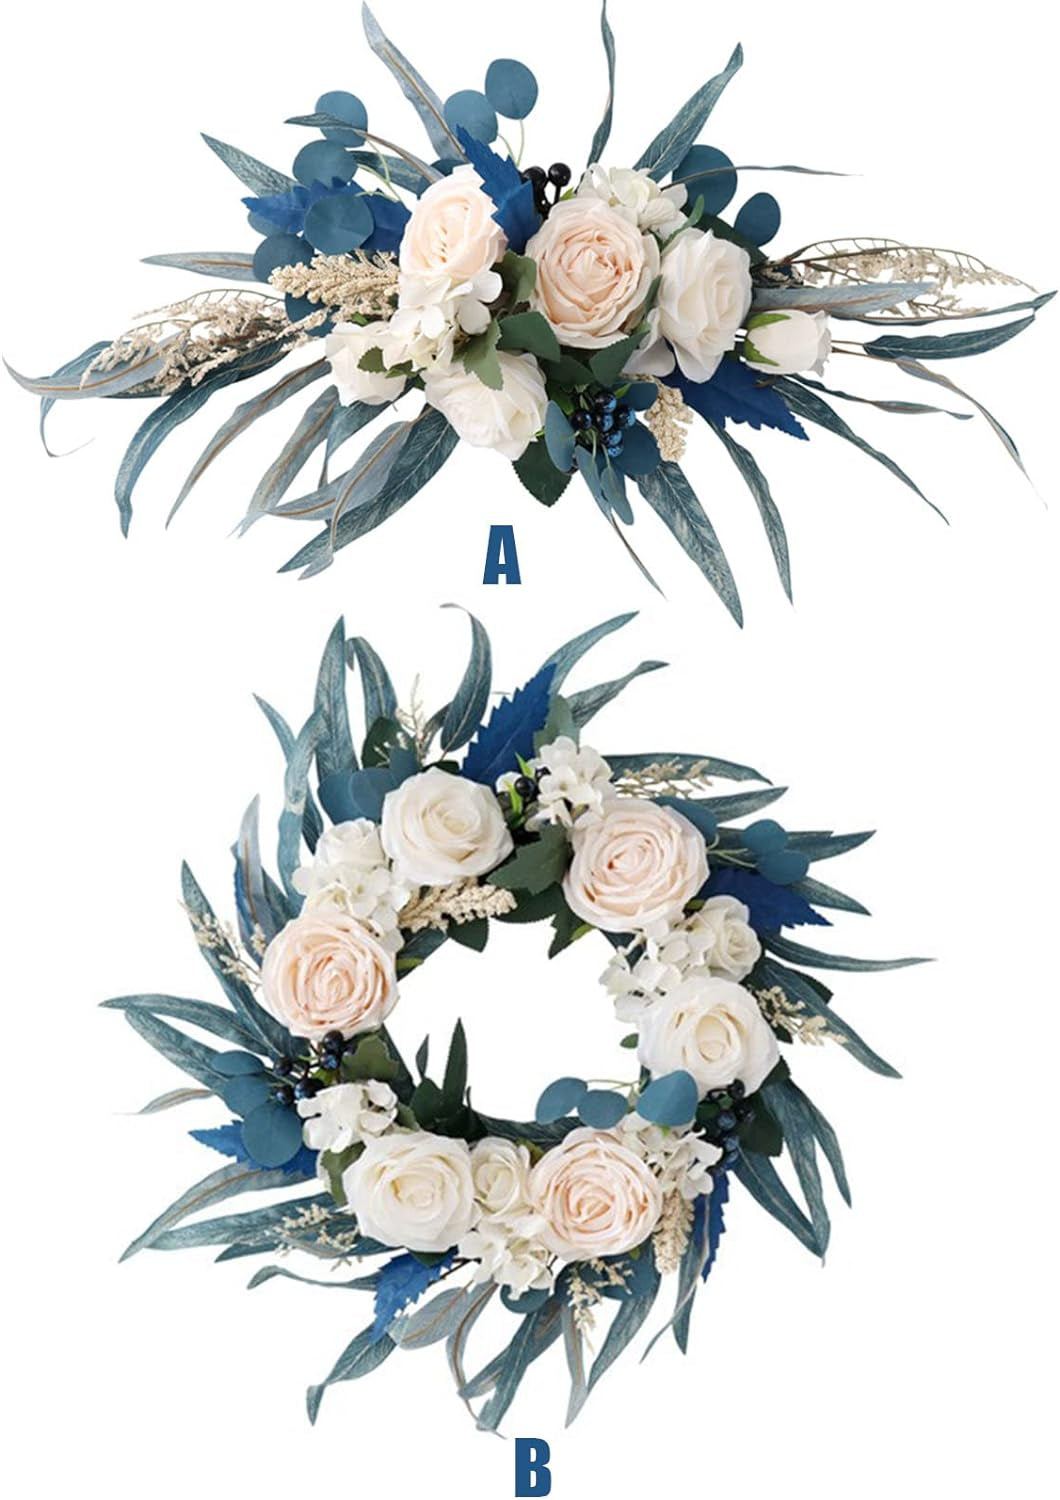 IUIBMI Spring Wreath with Malachite Blue Leaves and Silk Roses Flowers, Artificial Door Wreaths Swag for Front Door, Artificial Flower Wreath for Lintel Wall Window Wedding Arch Party Home Decor